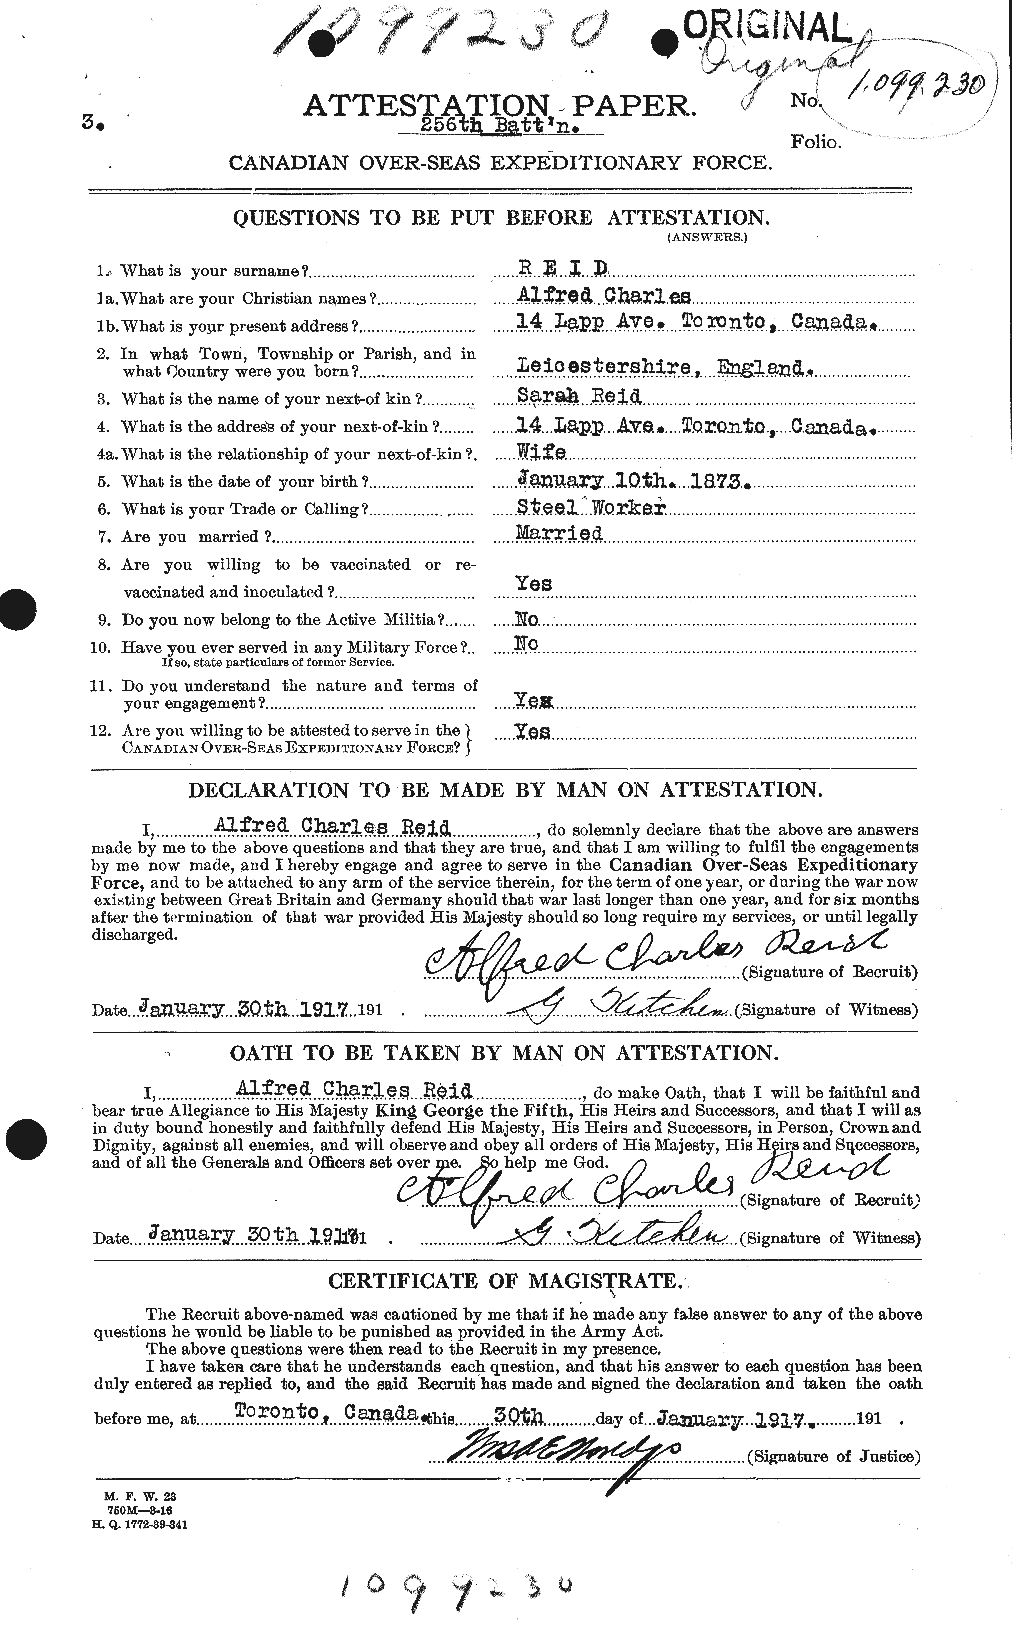 Personnel Records of the First World War - CEF 597792a